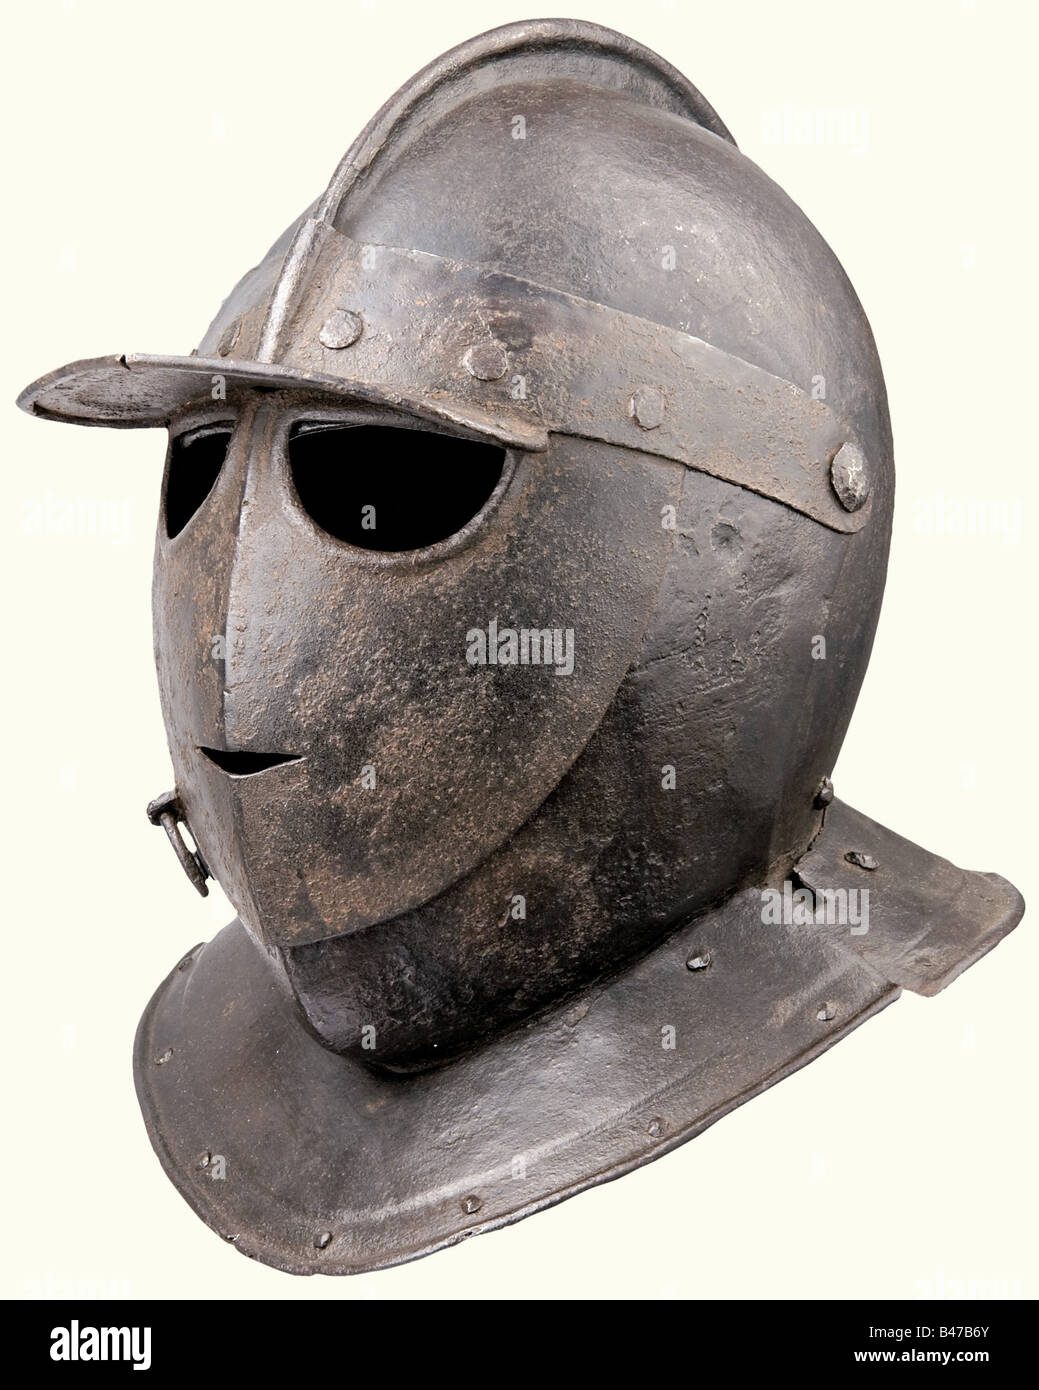 A Savoyard helmet (burgonet), or Italian, circa 1620 Heavy, hammered made of two pieces with a narrow comb, riveted neck protector and plume socket the back. Typical death's-head visor